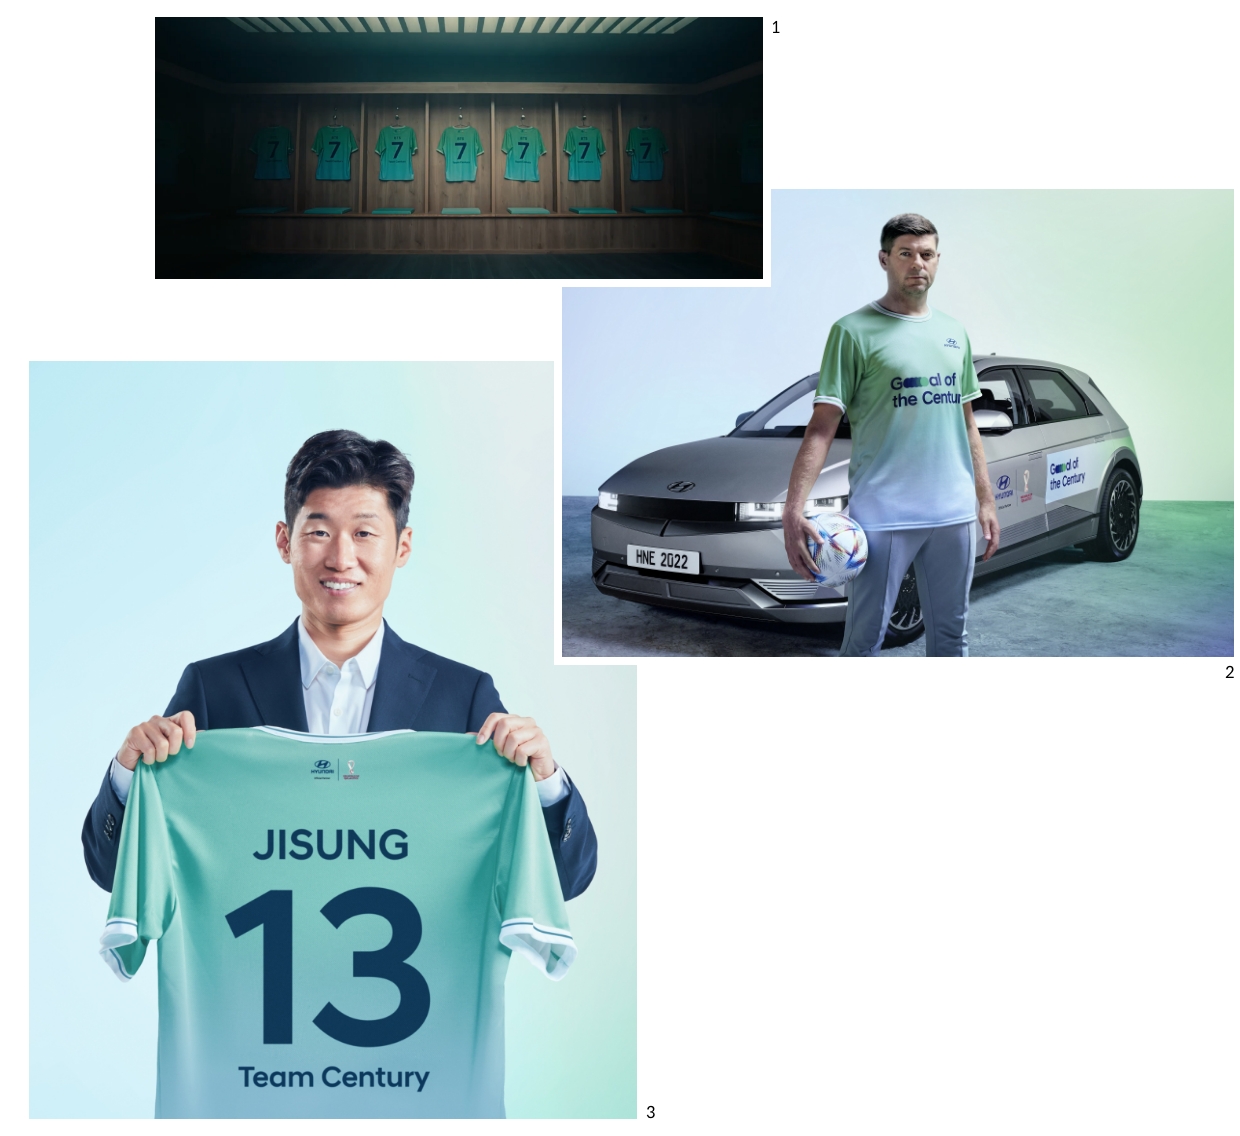 A Team Century T-shirt hanging on a locker, Gerard posing in front of IONIQ 5, and Park Ji-Sung holding a Team Century T-shirt